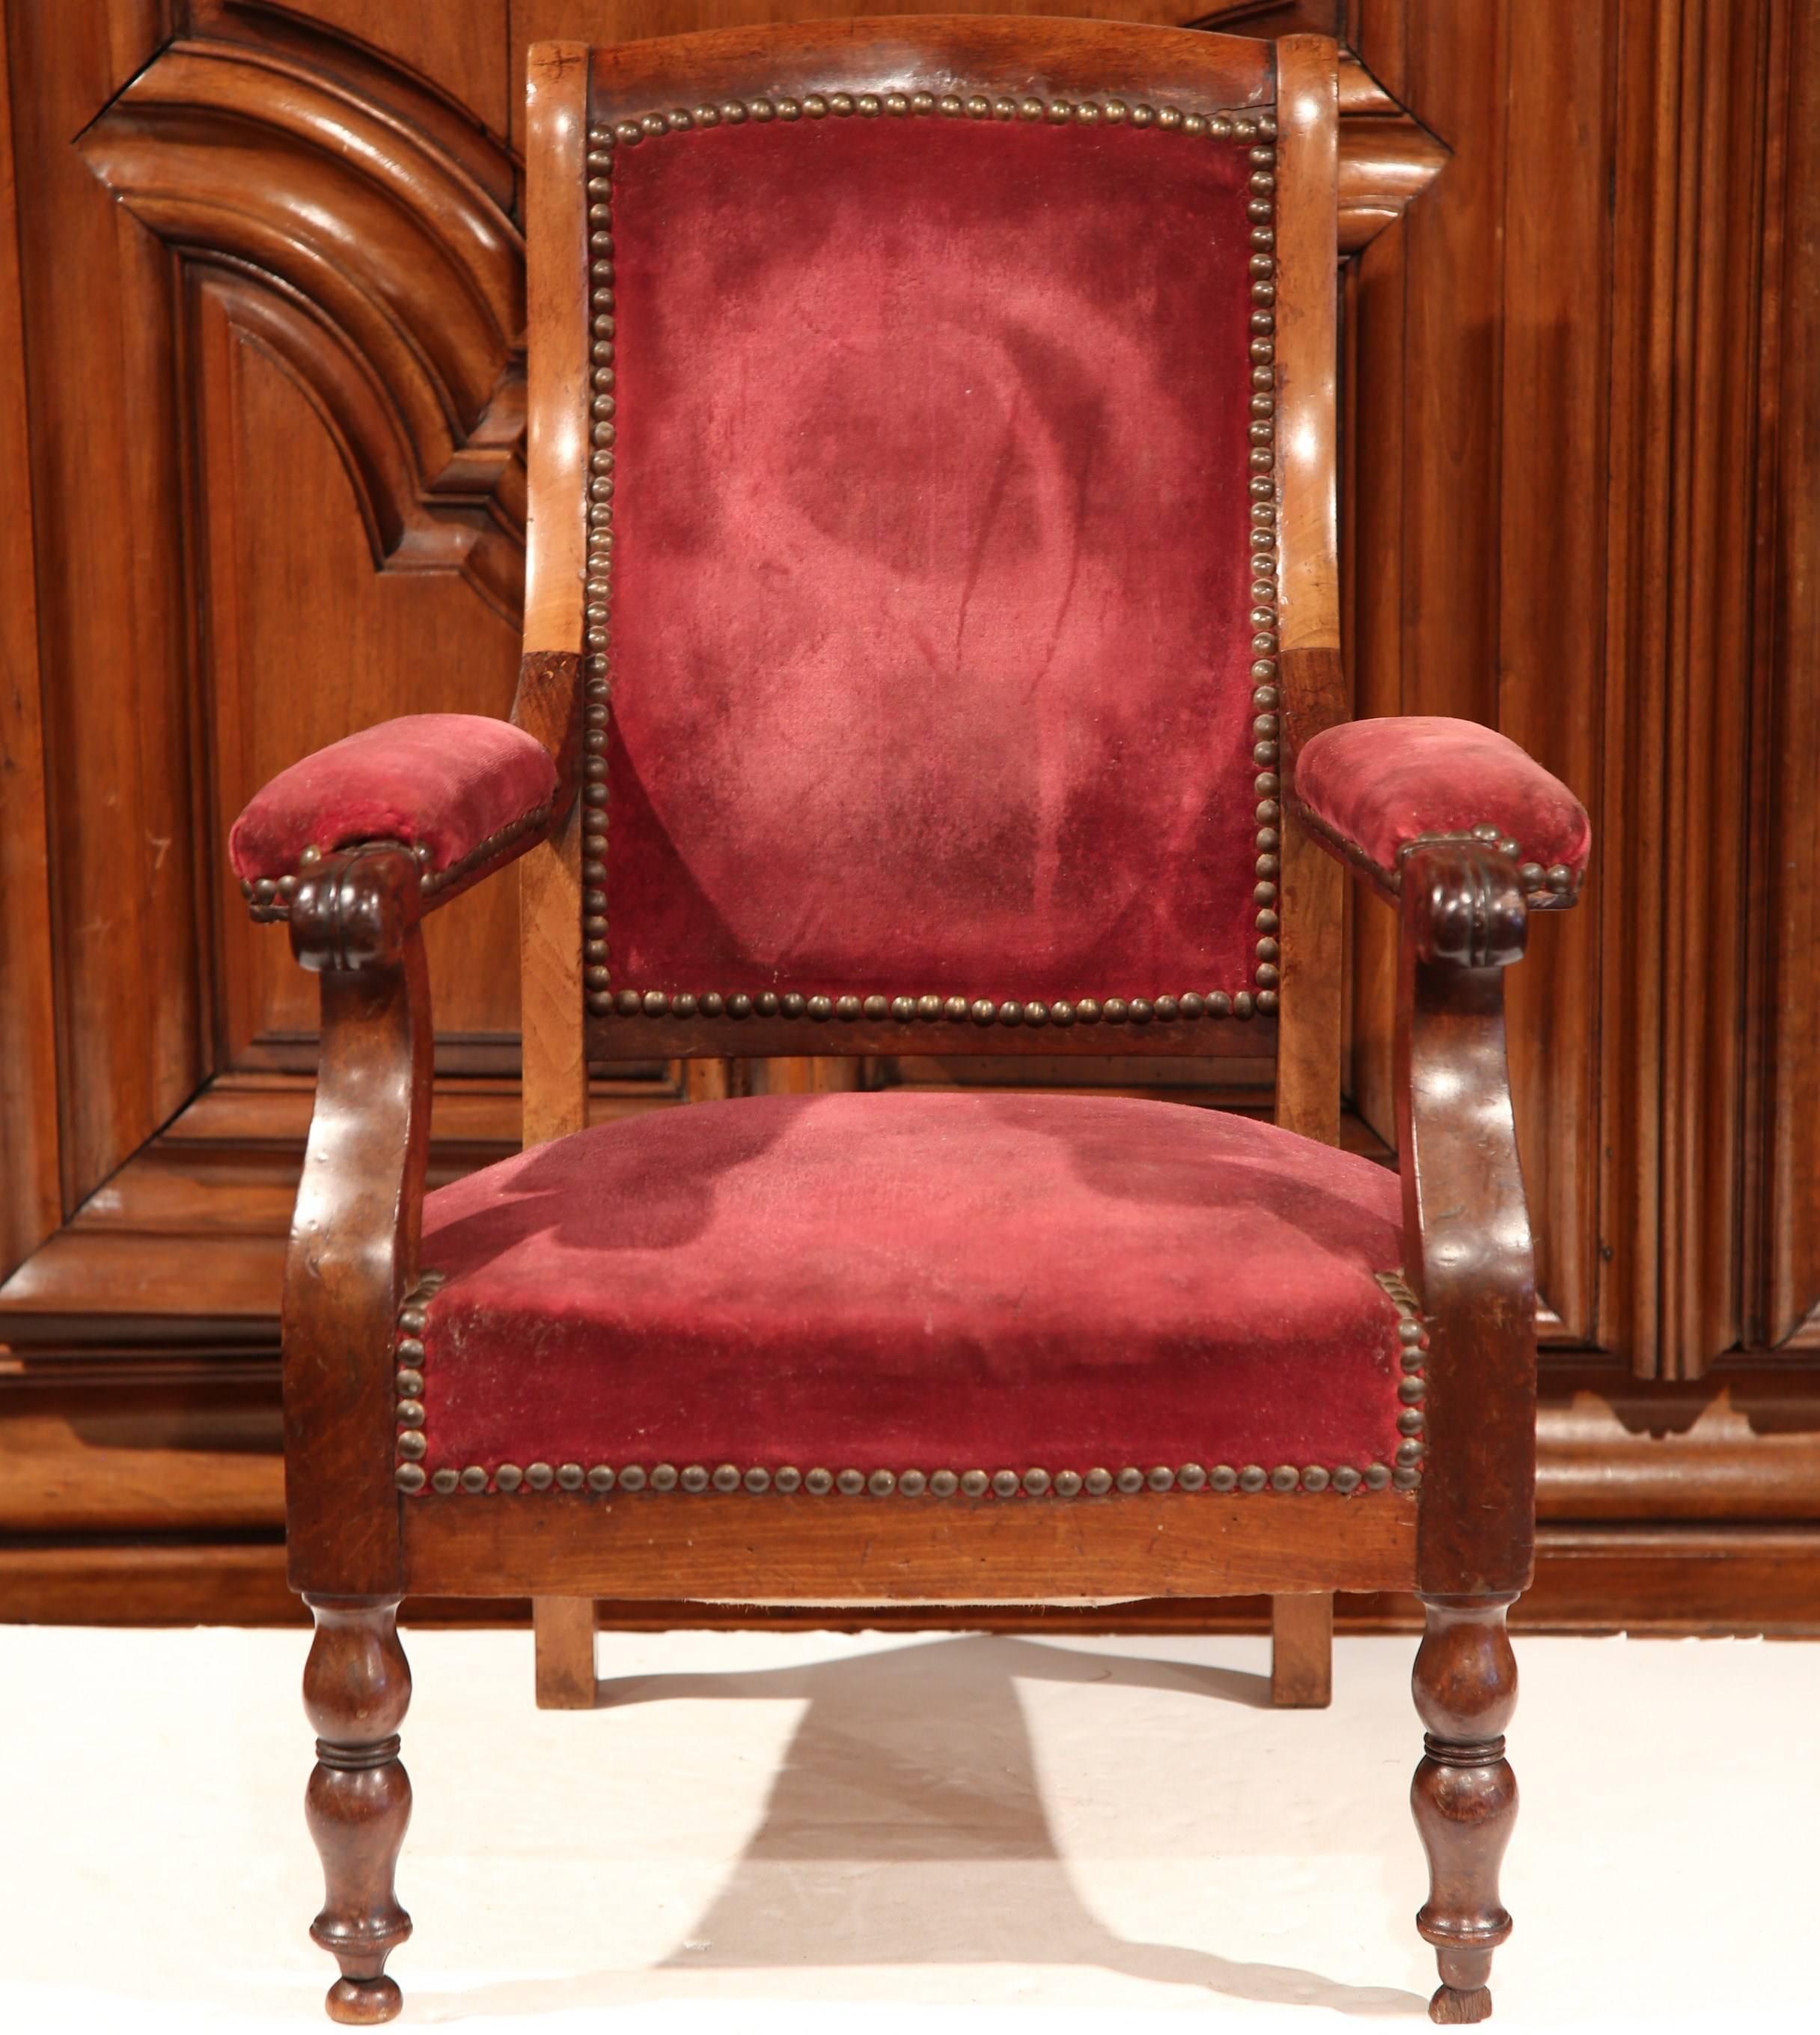 Add charm to a family friendly living room with this elegant, fruitwood youngster armchair. Carved in France, circa 1850, the antique chair has a high back, armrests and front turned legs, and is upholstered with a red velvet fabric, and embellished